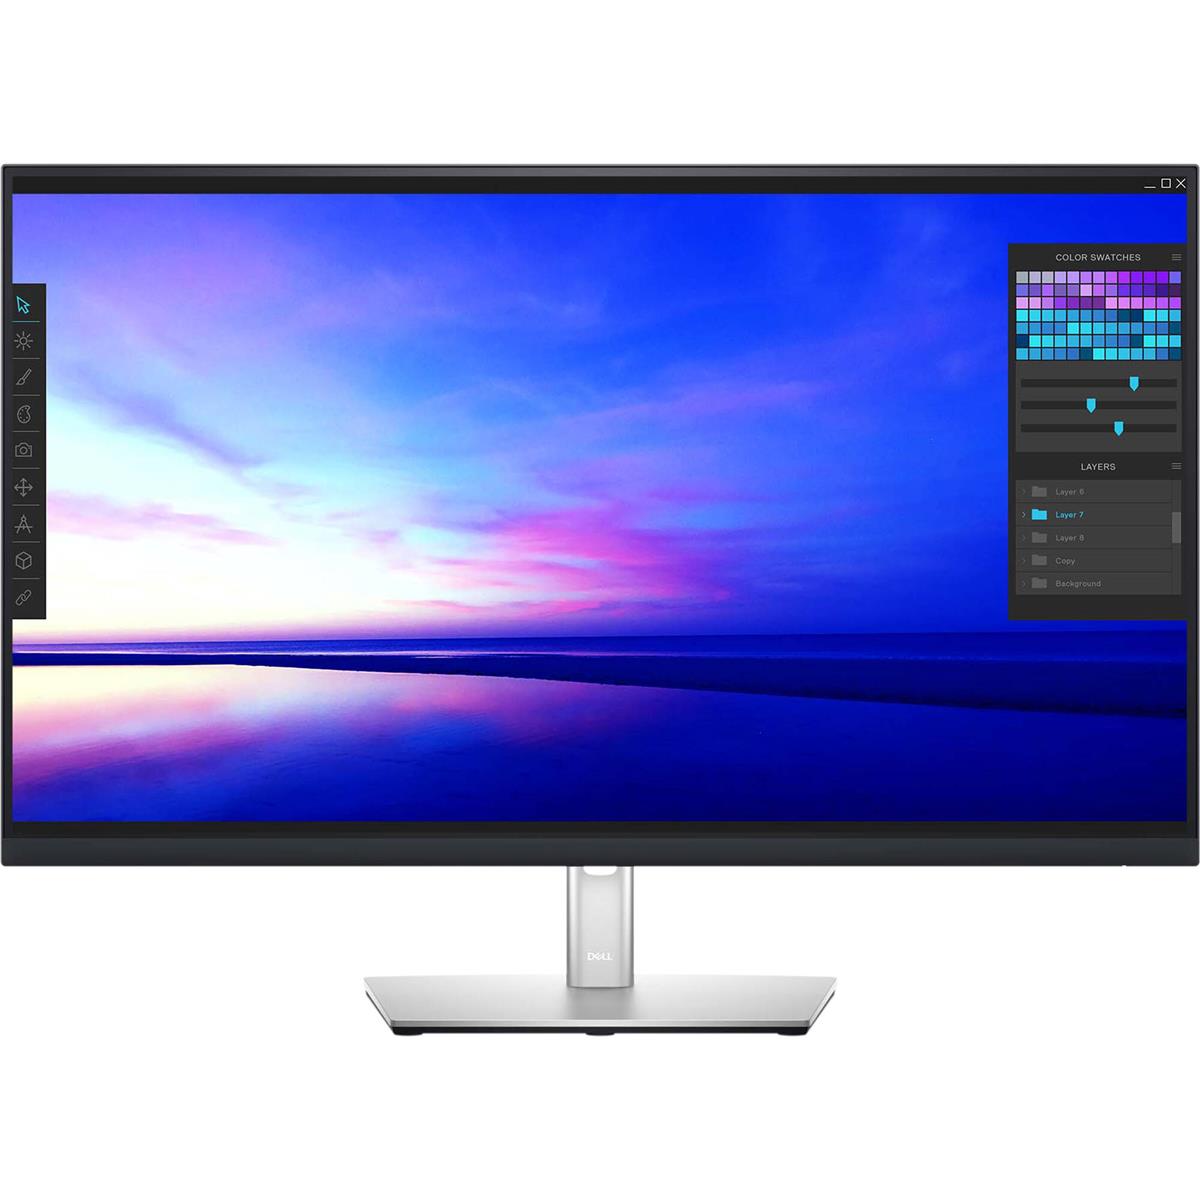 

Dell P3221D 31.5" 16:9 QHD LED-Backlit IPS WLED LCD Monitor